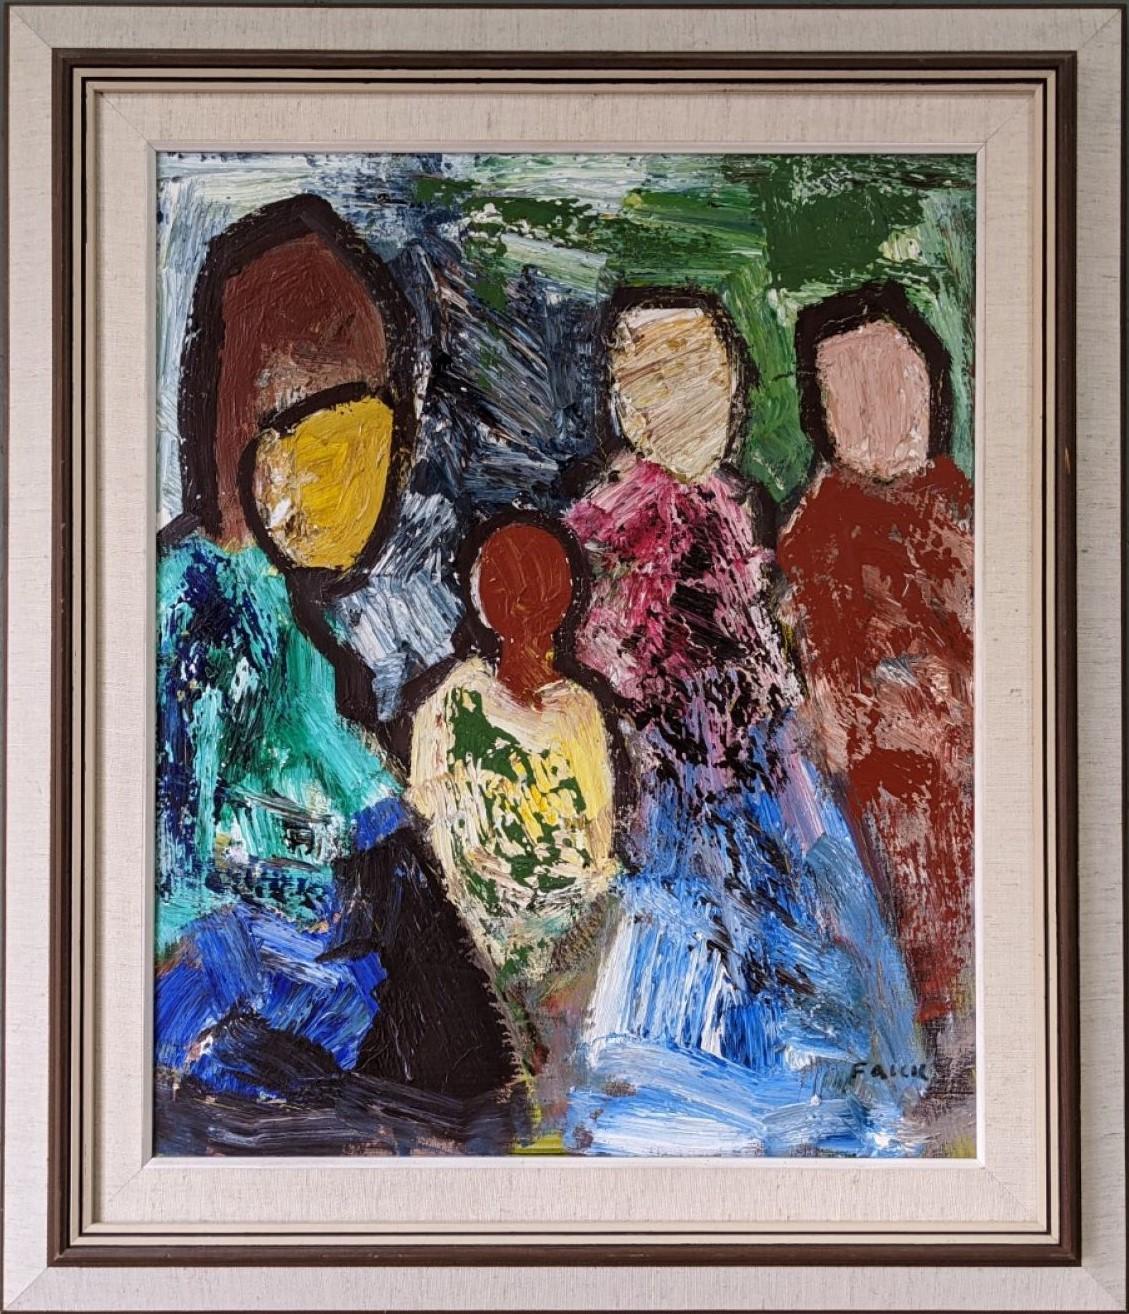 Unknown Abstract Painting - Vintage Mid-Century Modern Swedish Figurative Framed Oil Painting - Folks